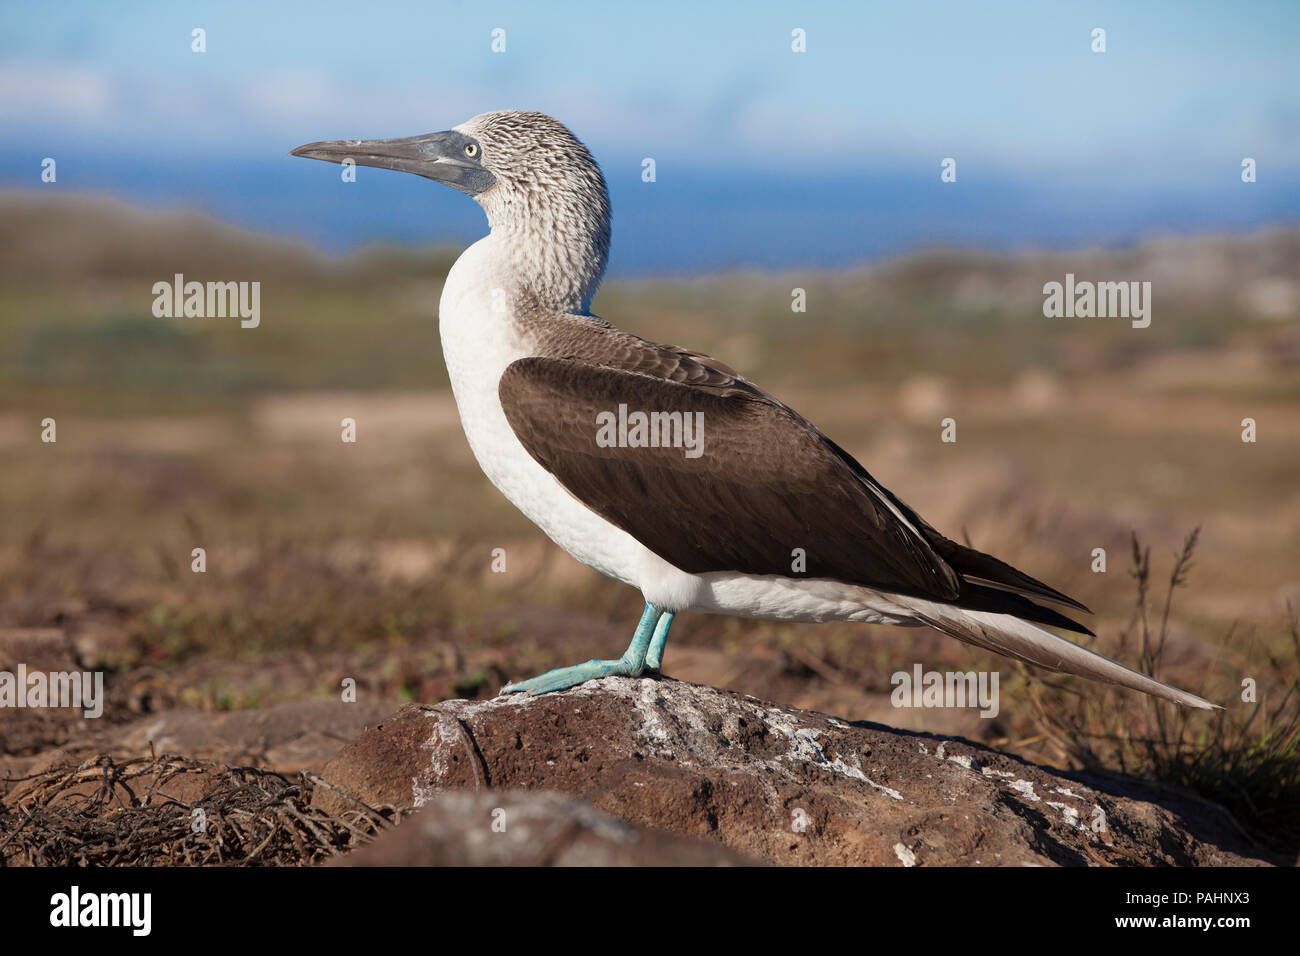 blue-footed booby (Sula nebouxii), Galapagos Islands Stock Photo